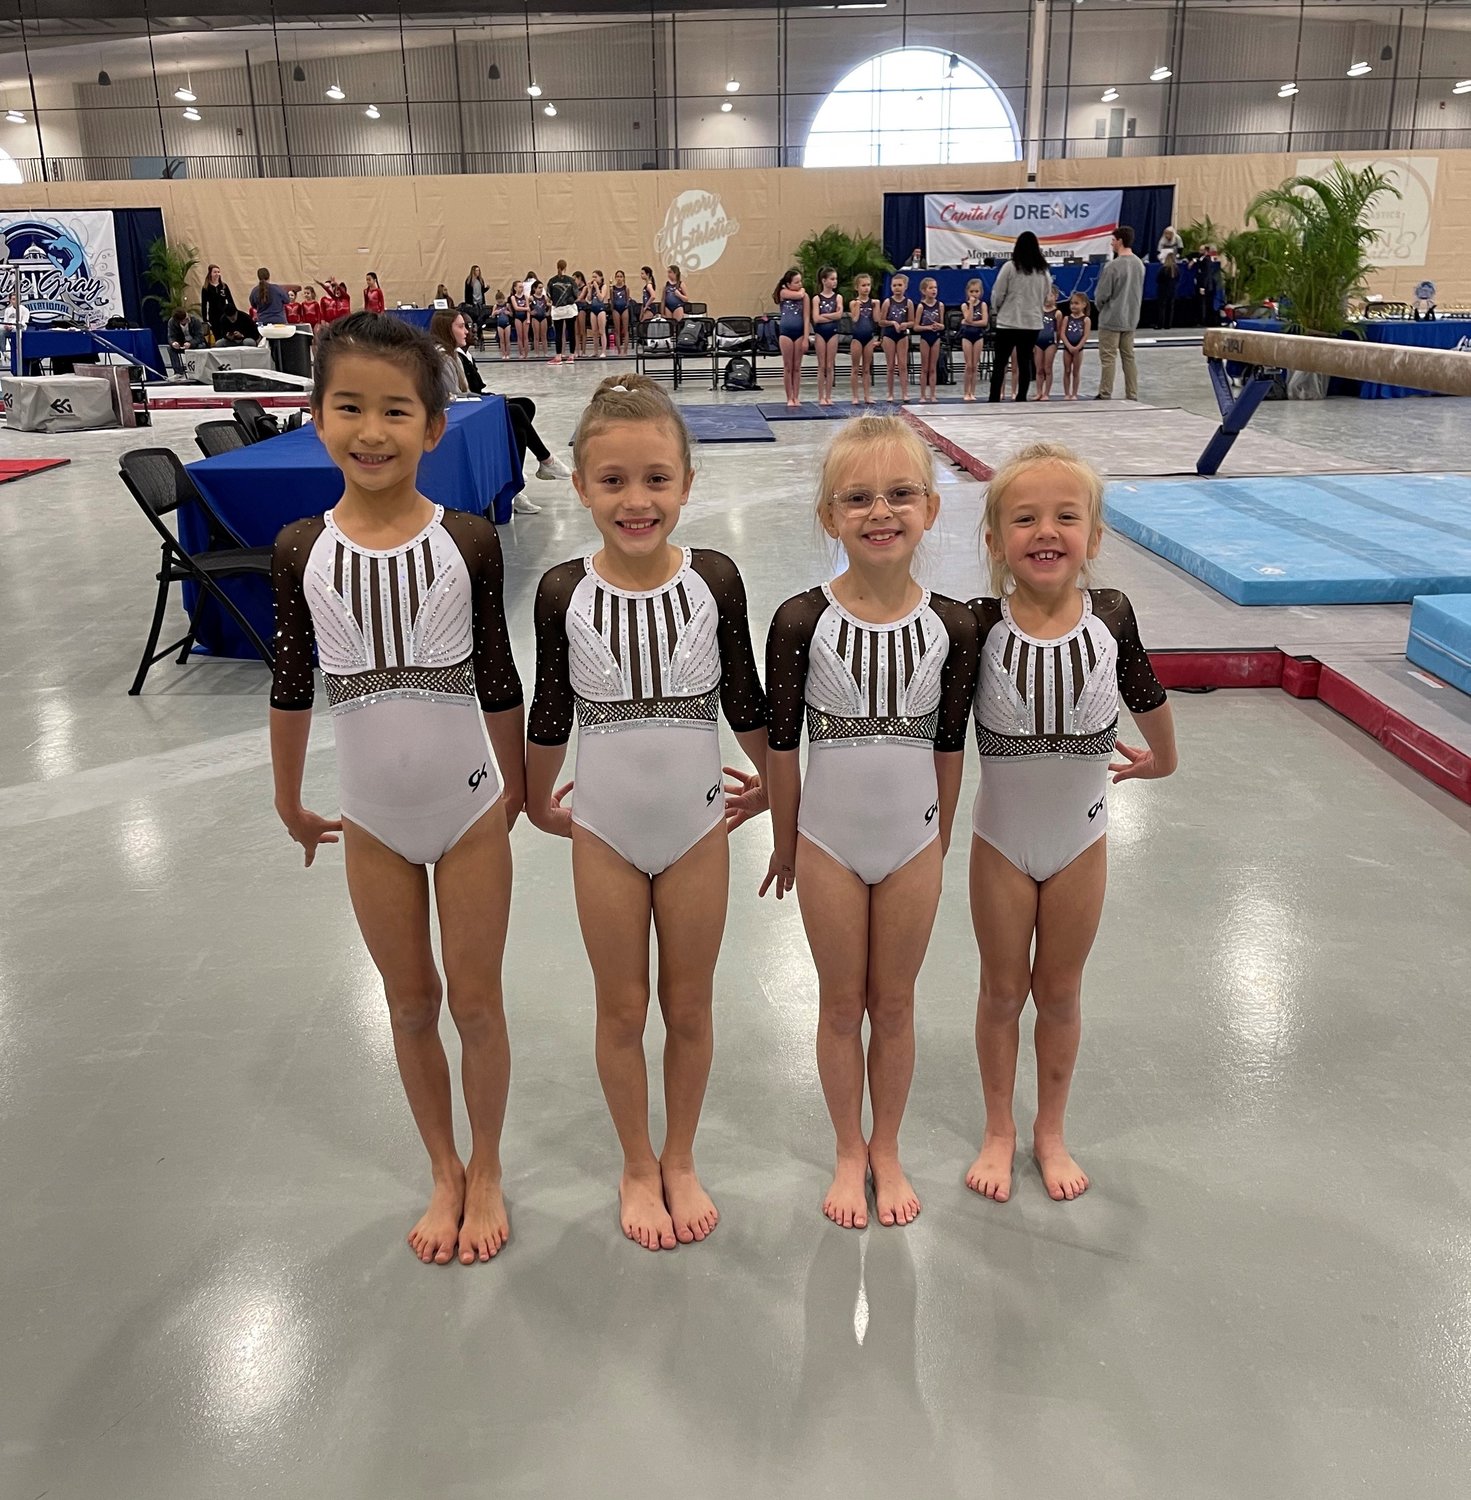 The Eastern Shore Gymnastics Academy's Xcel Bronze team won third place team overall at the Alabama Xcel State Championship. From left are Angela Taniguchi, Eden Cryar, Maci Edwards and Maggie Myrick.